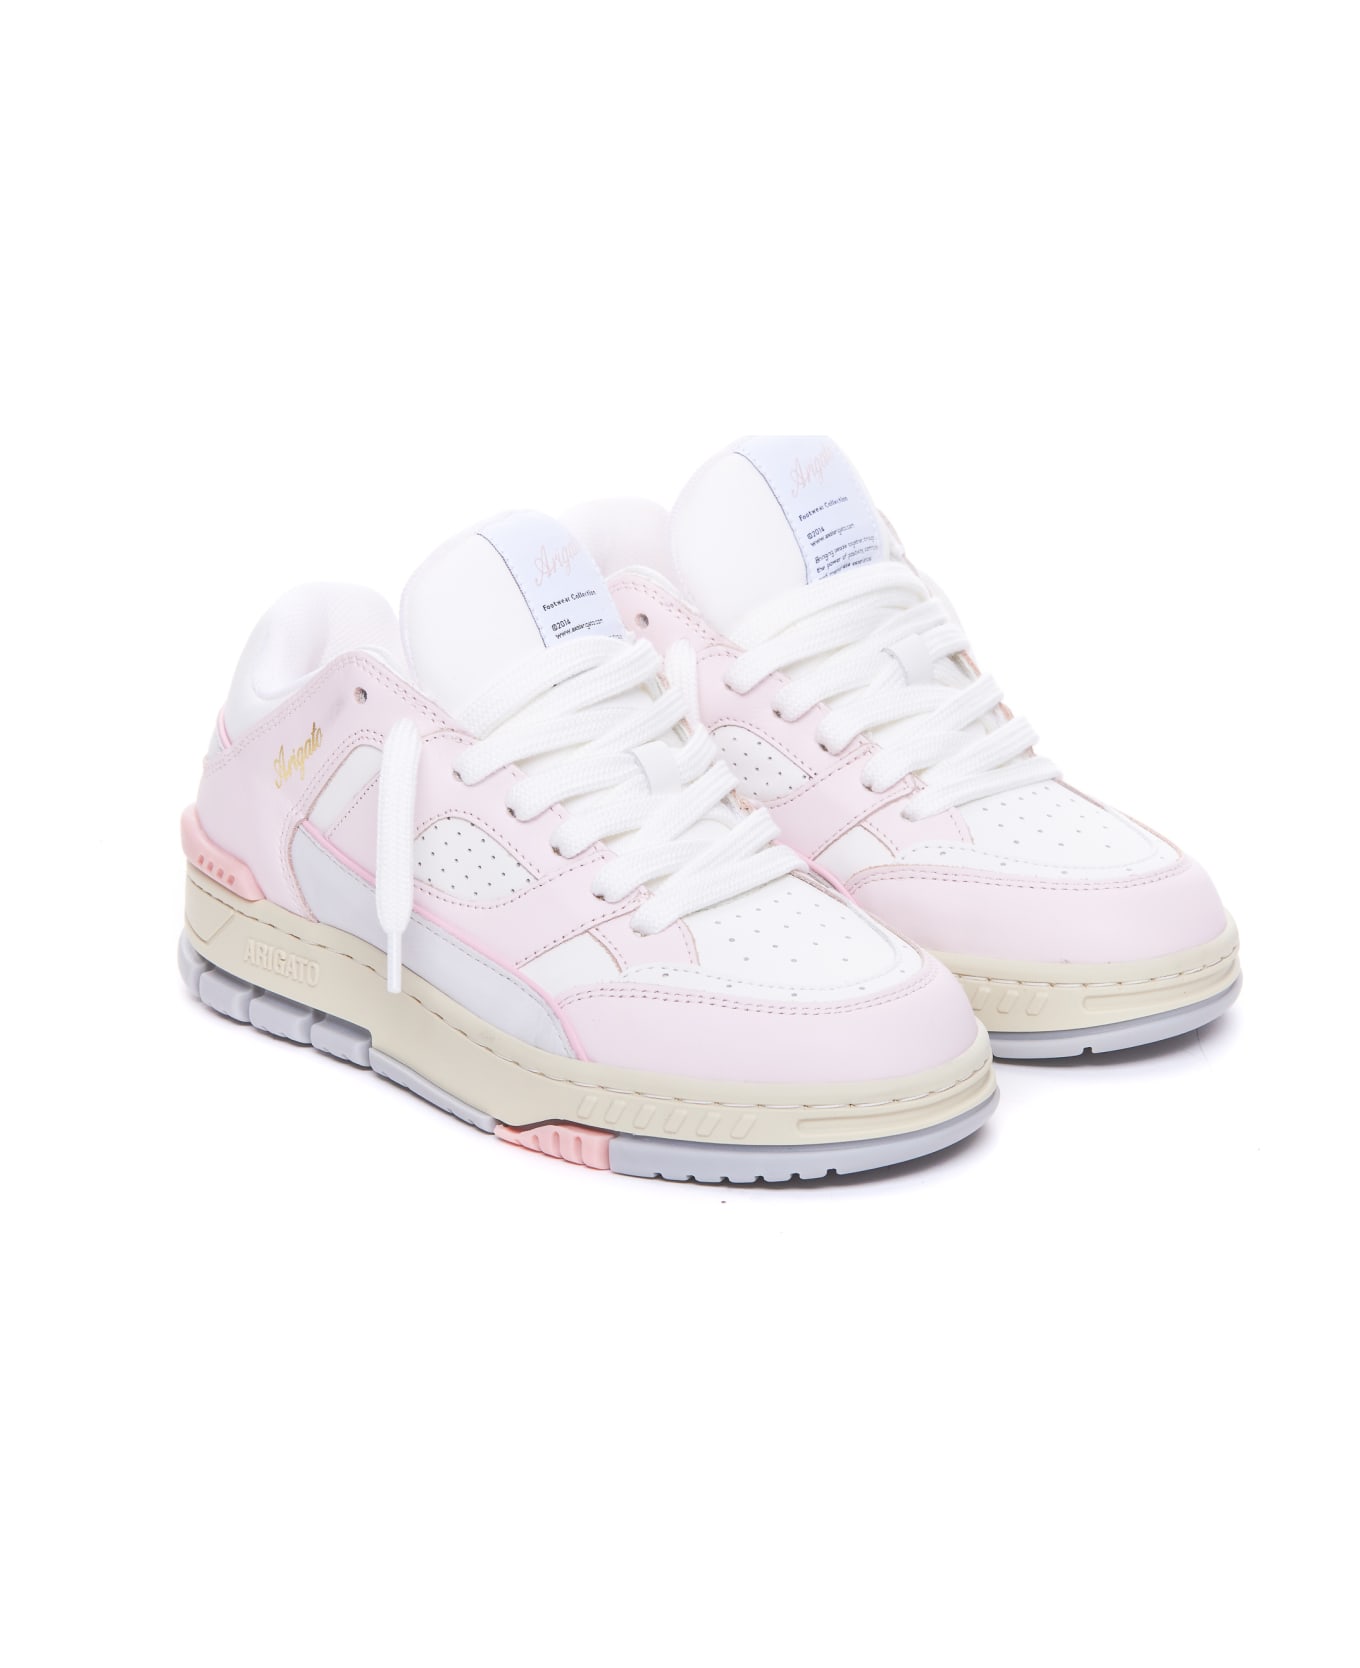 Axel Arigato Area Lo Sneakers - Pink スニーカー